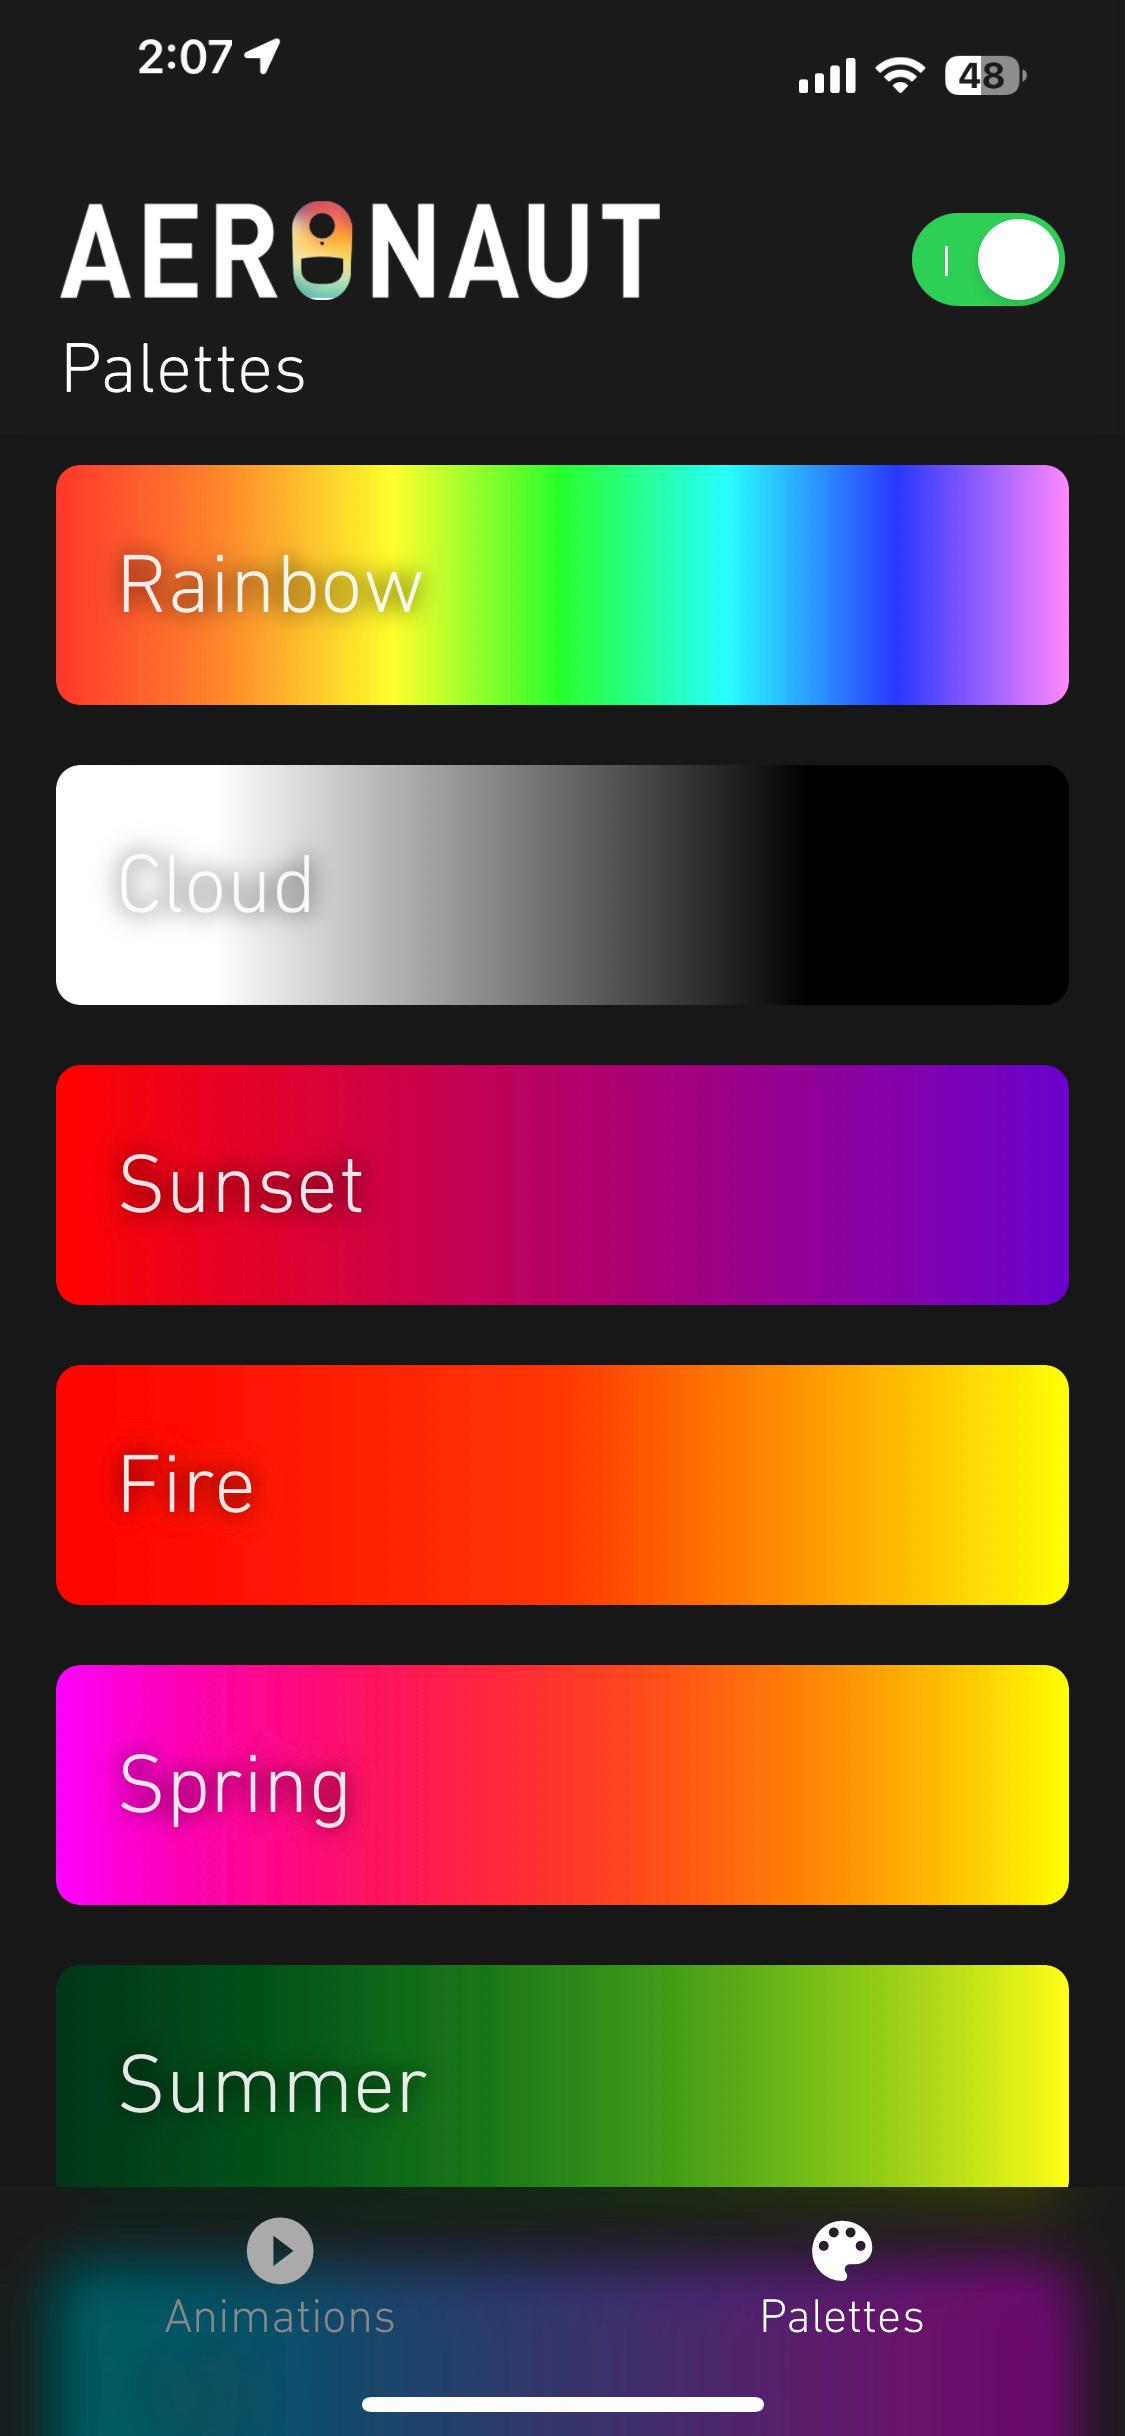 React-native app with animation and color palette control